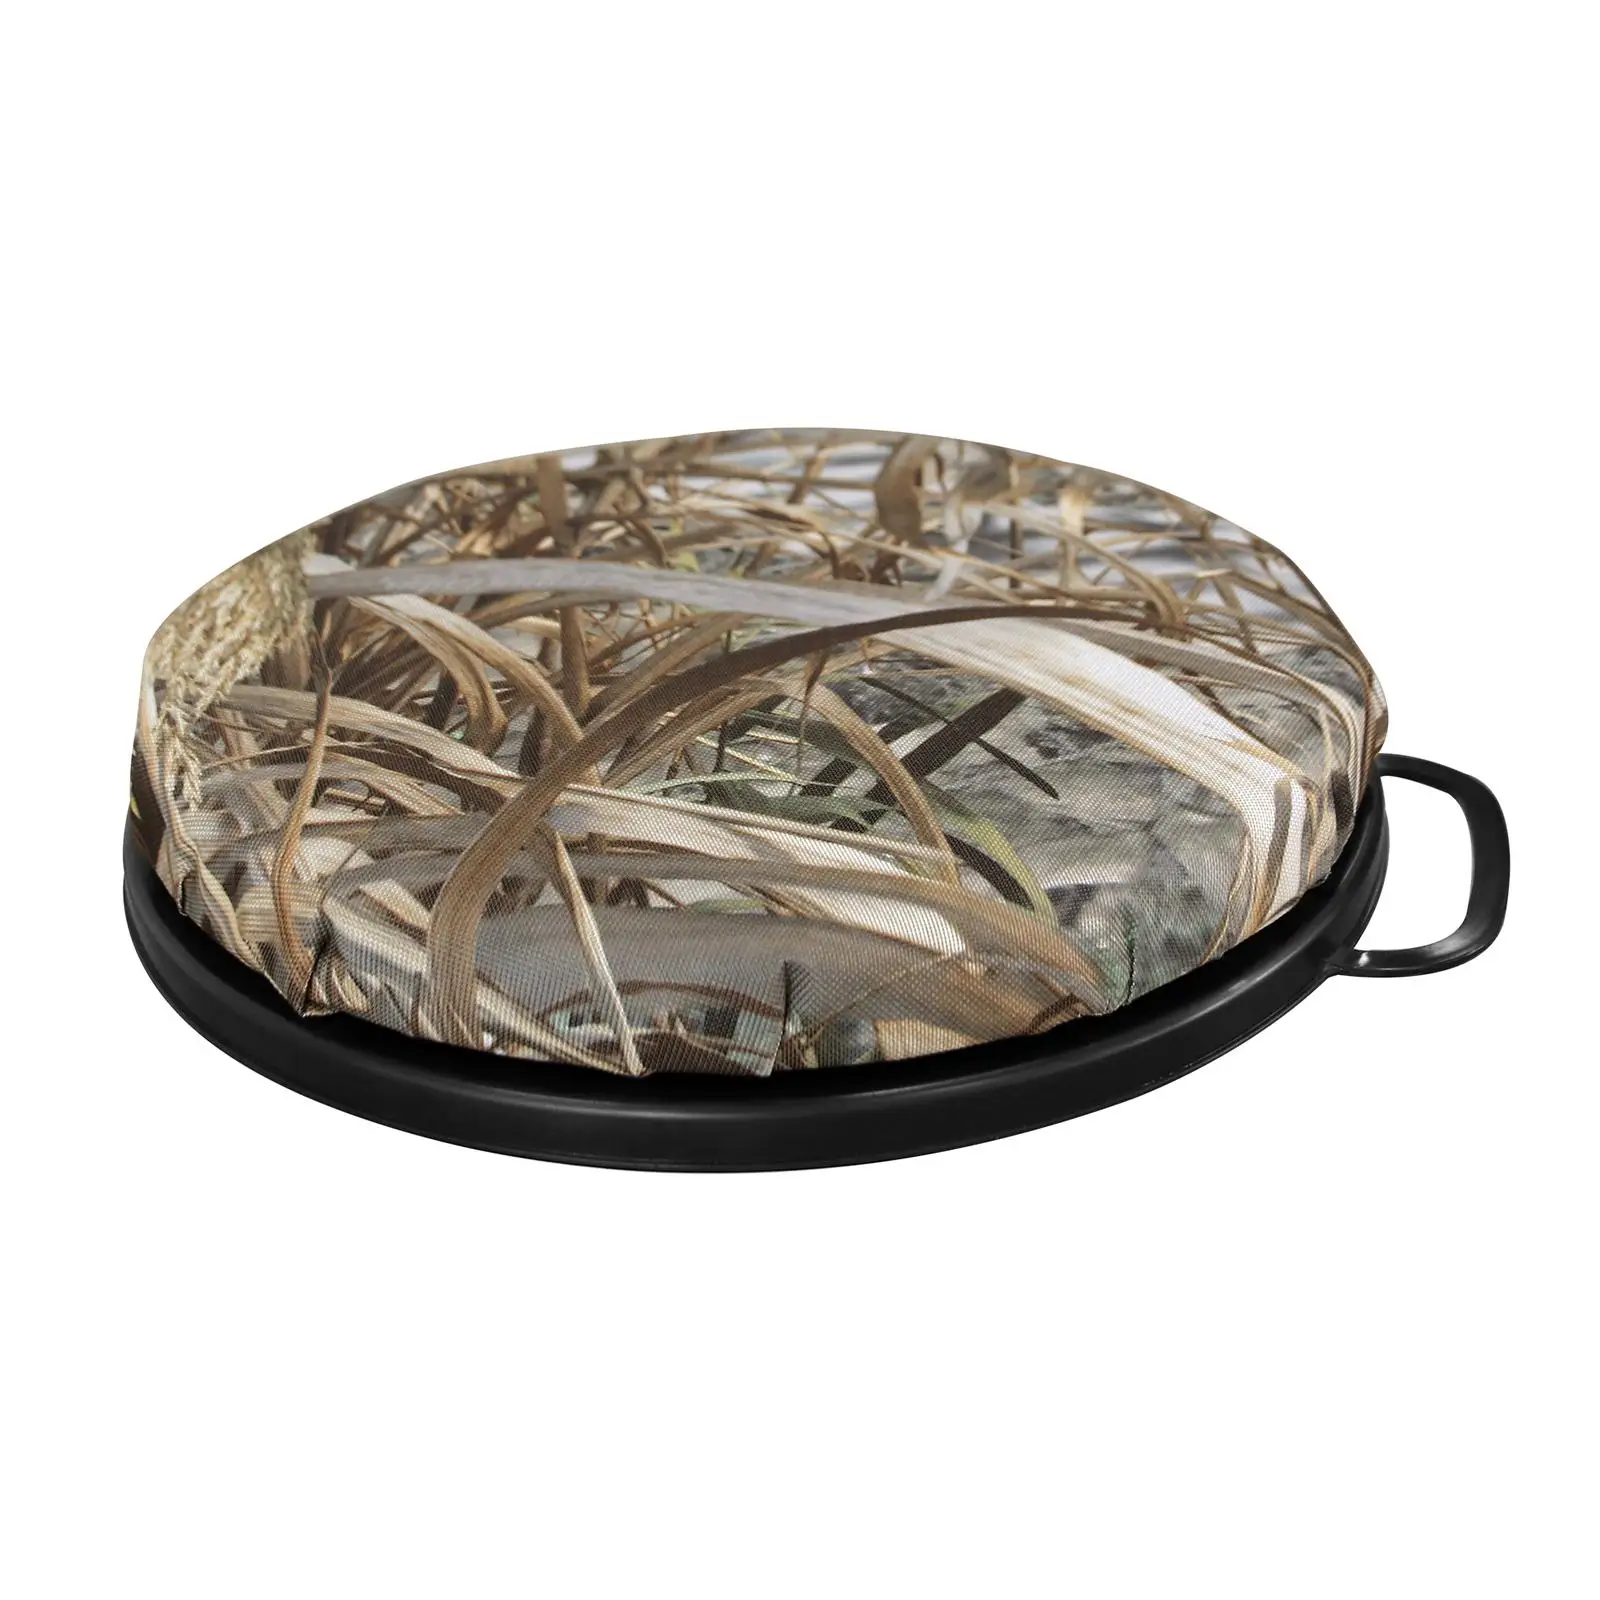 Hunting Seat Cushion Thickened with Handle Oxford Cloth 5 Gallons Bucket Mat for